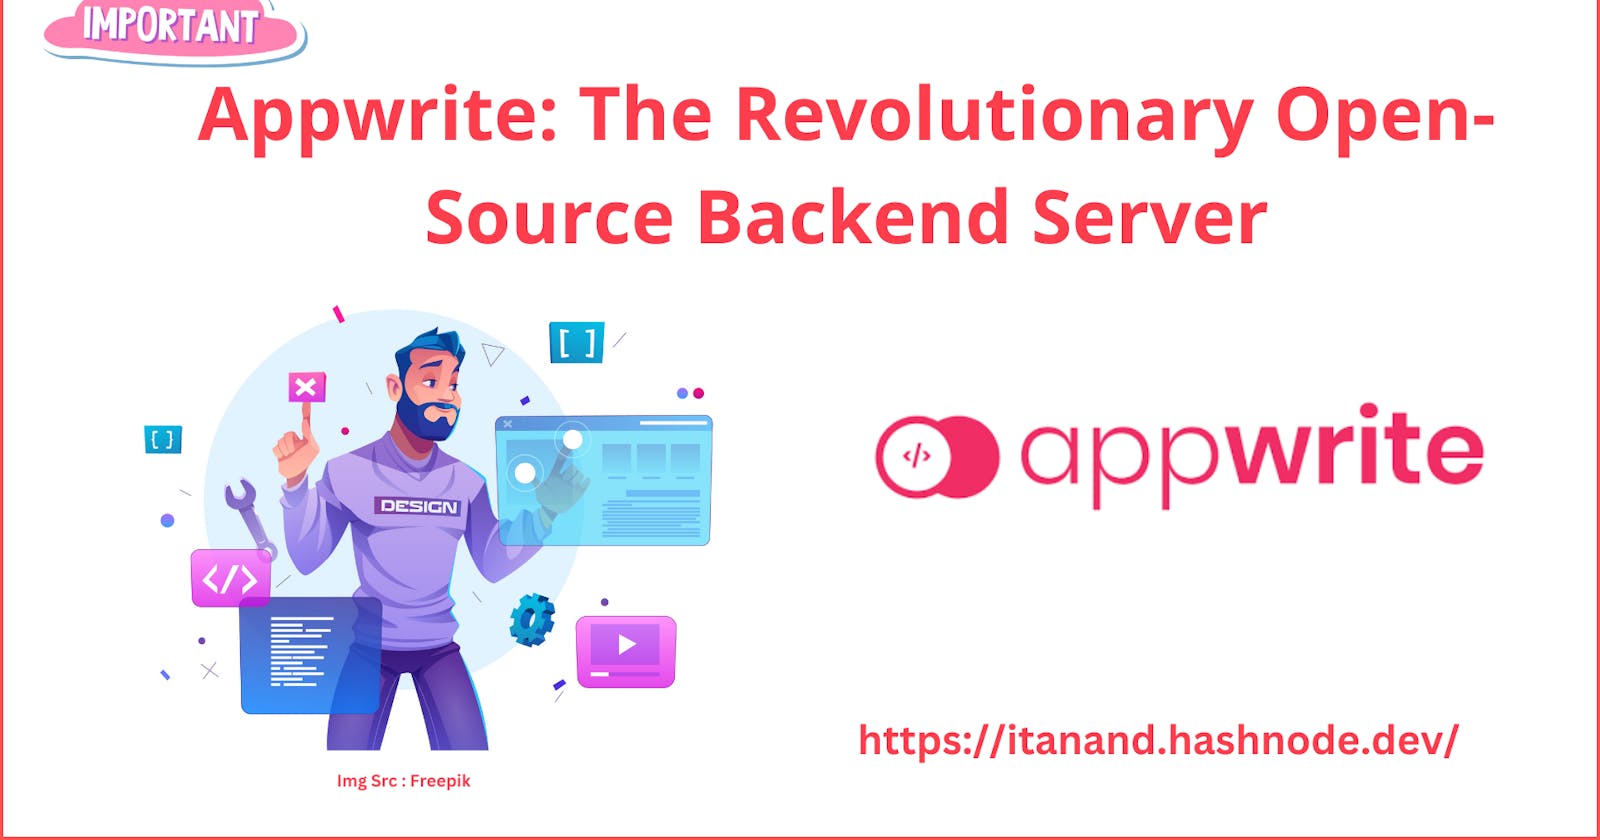 Appwrite: The Revolutionary Open-Source Backend Server